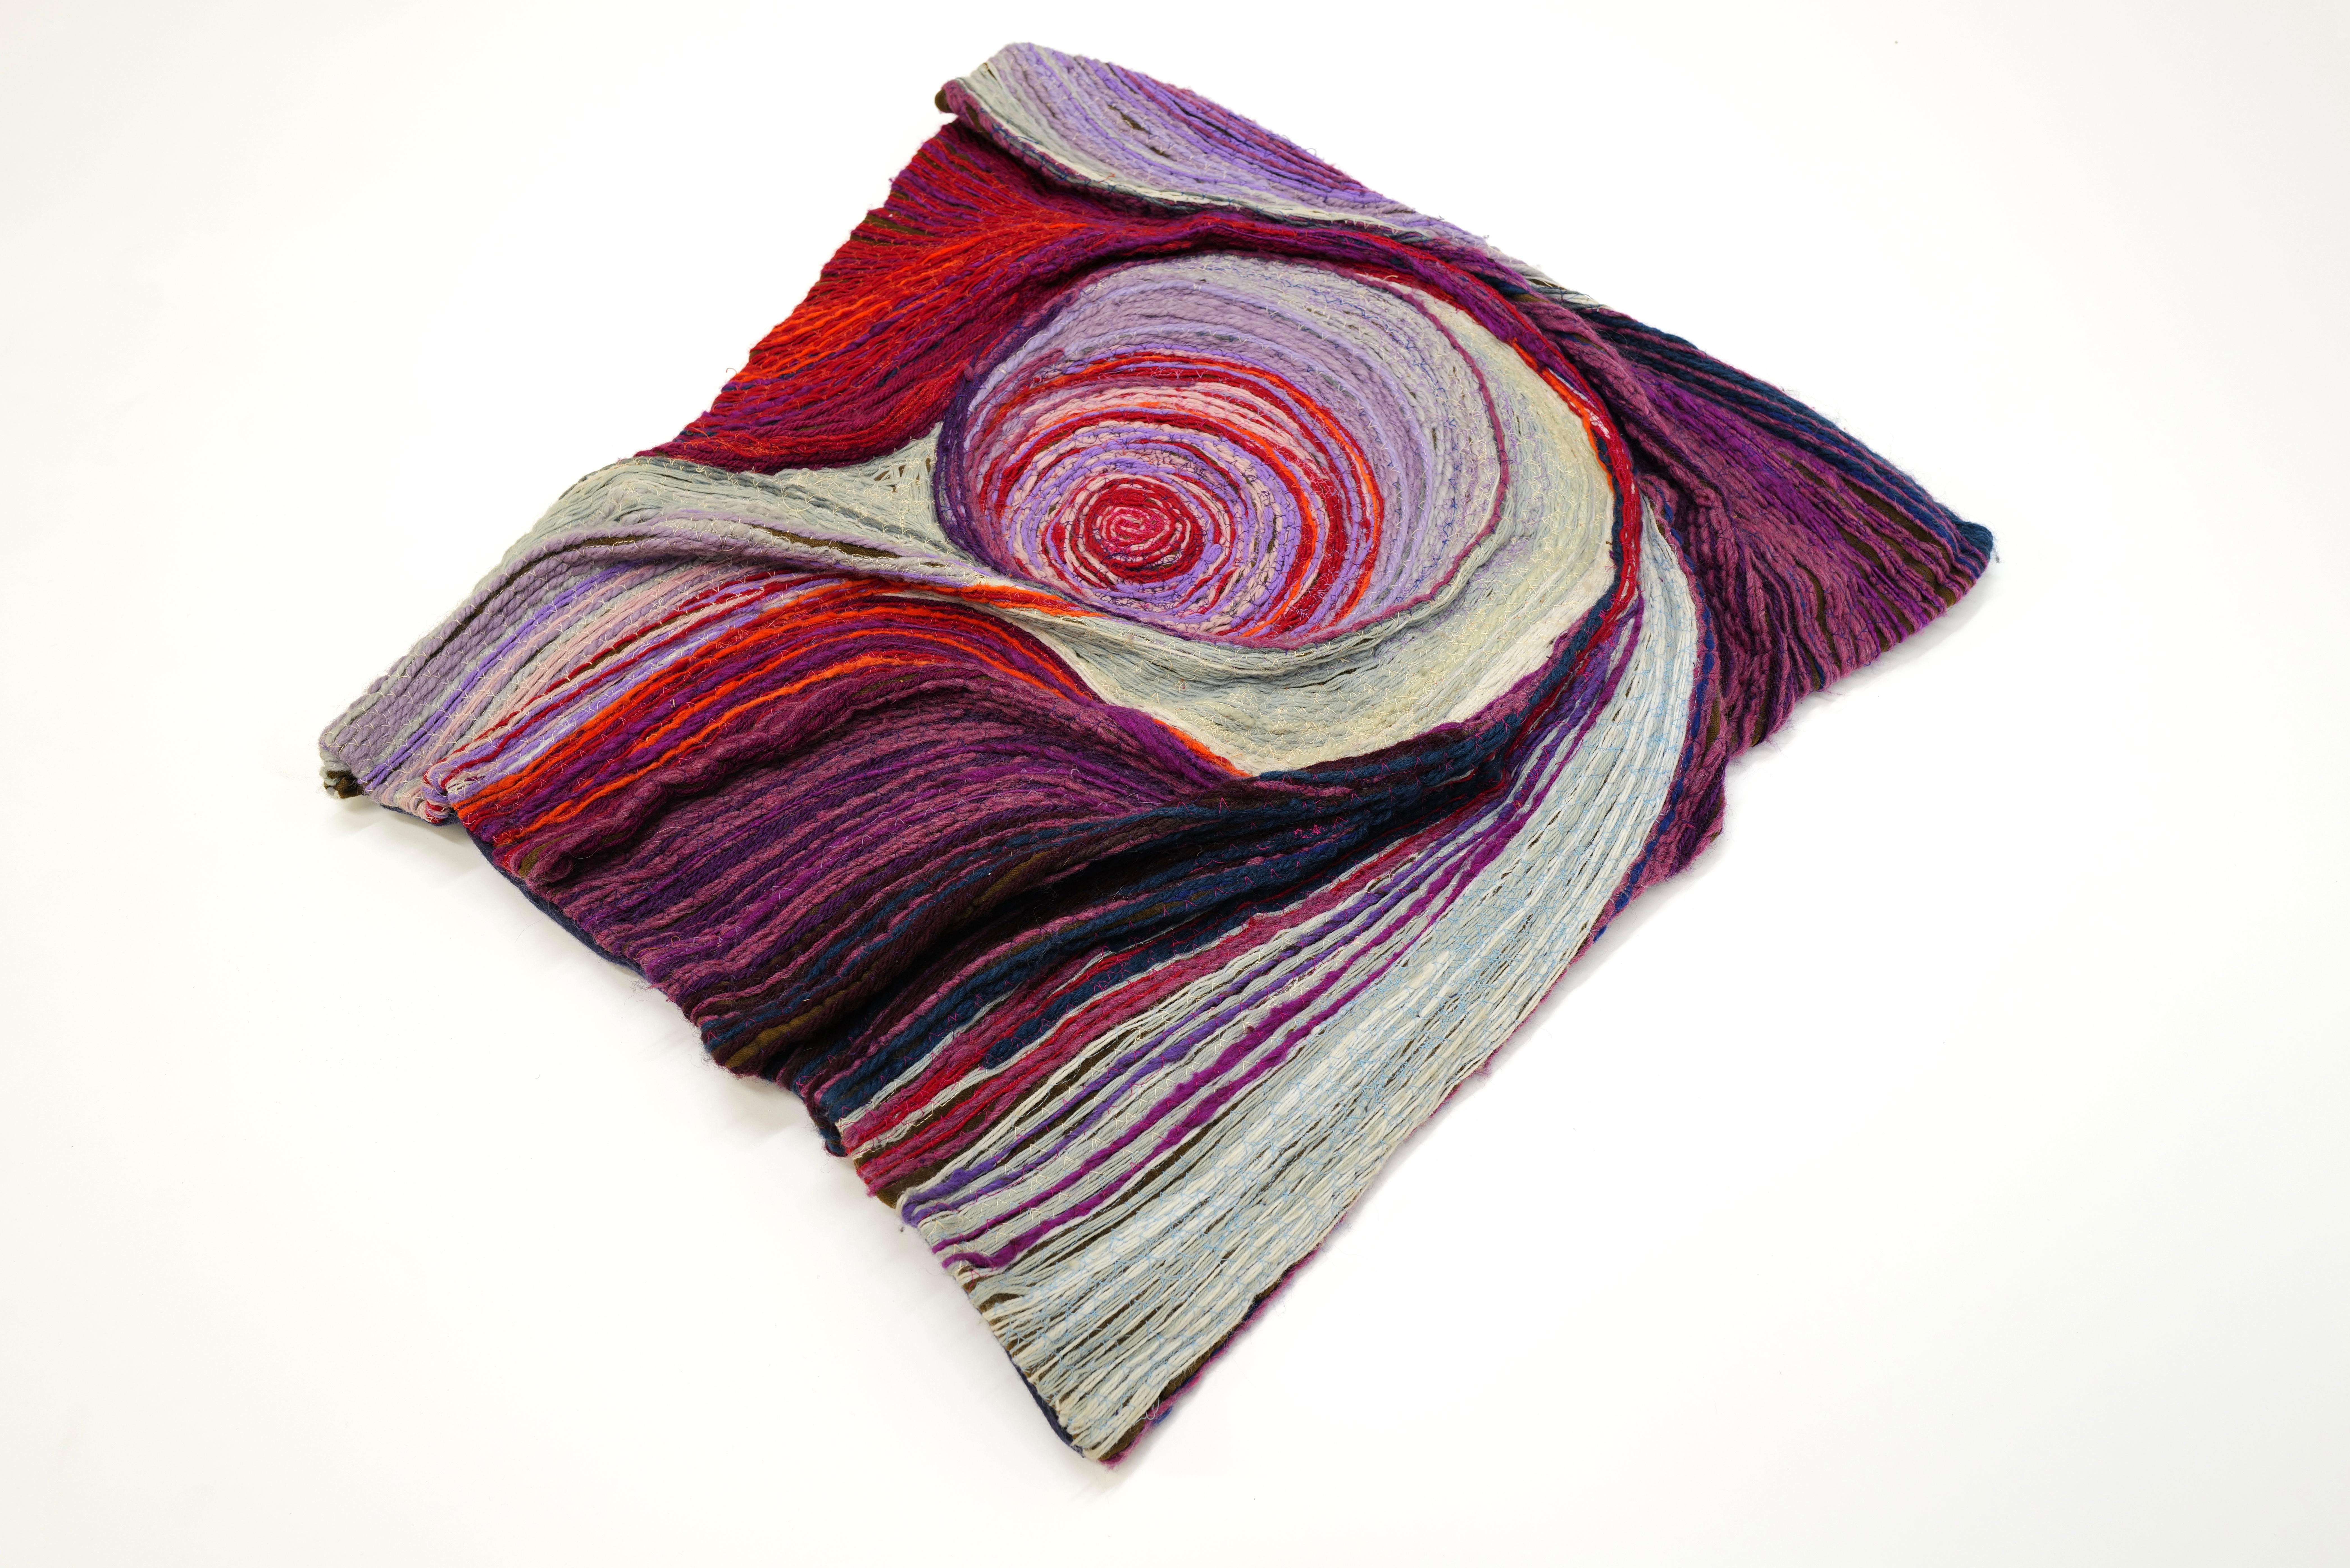 Janet Kuemmerlein's stunning fiber art piece, measuring 24”x 26”, is a captivating exploration of color and texture. With a mesmerizing palette ranging from vibrant purples to fiery reds, interspersed with hints of white or cream, the artwork evokes